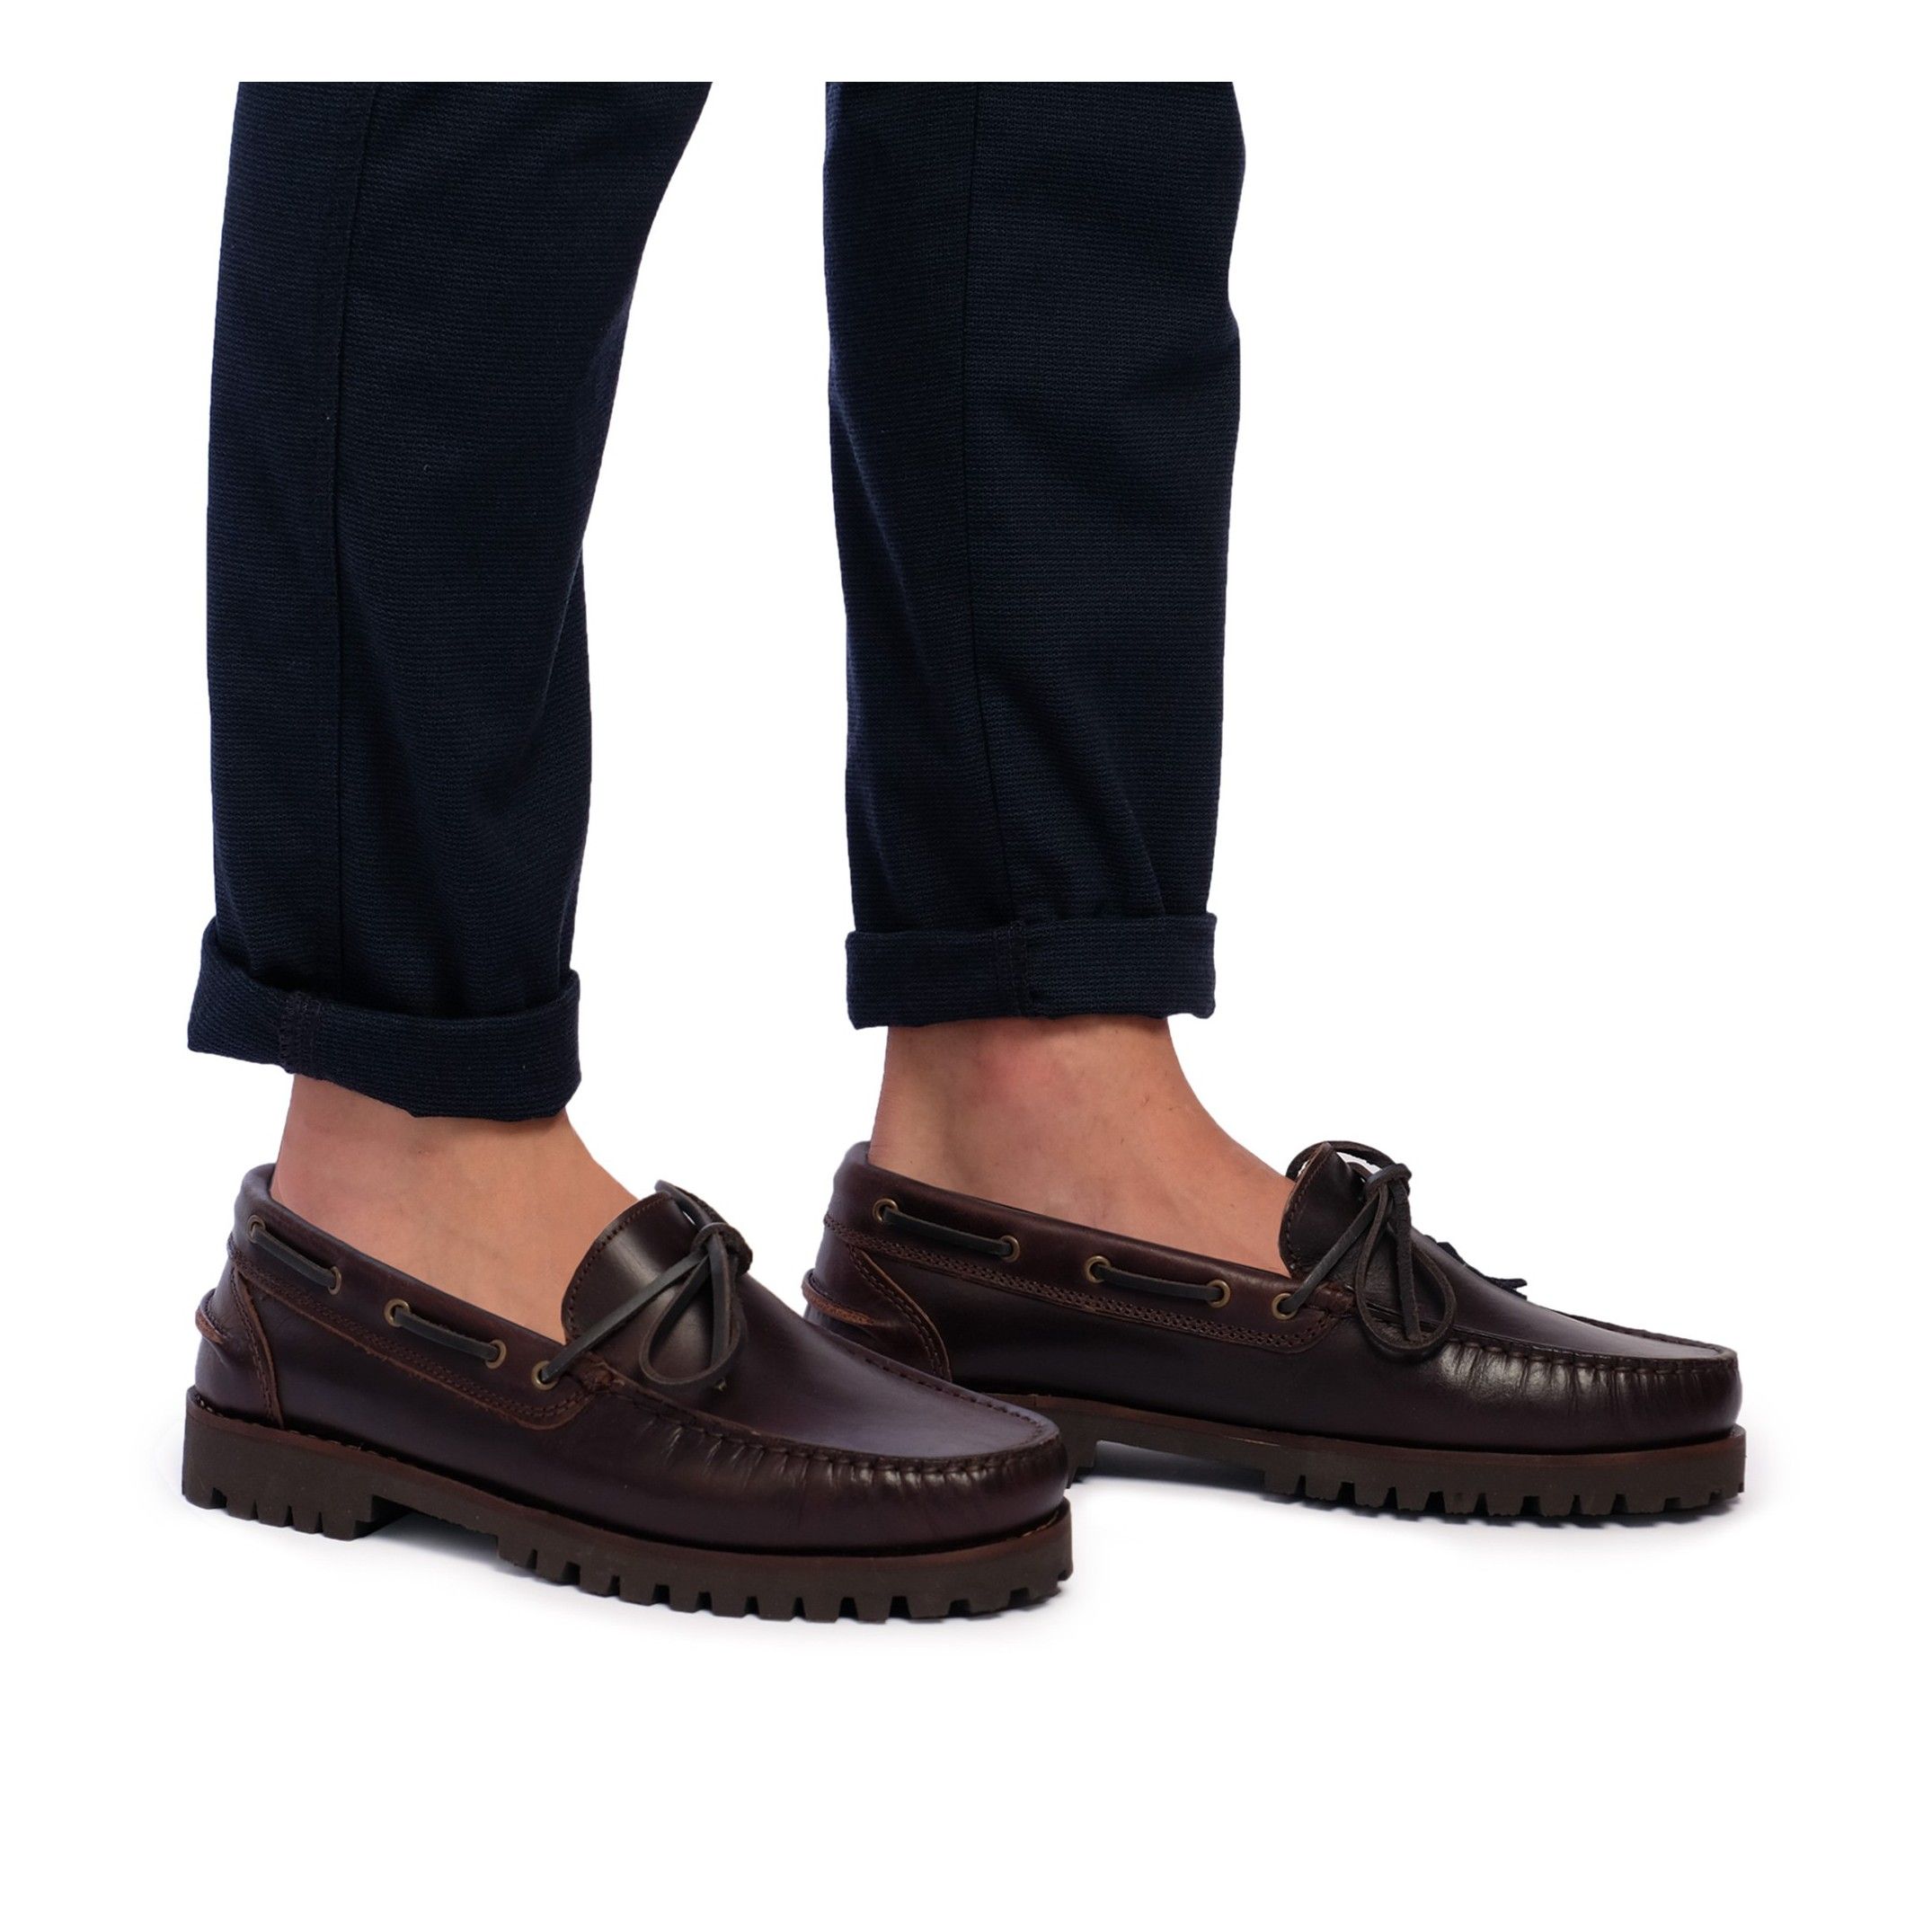 Boat shoes for men with laces closure. Upper and inner made of leather. Rubber sole. Made in Spain.